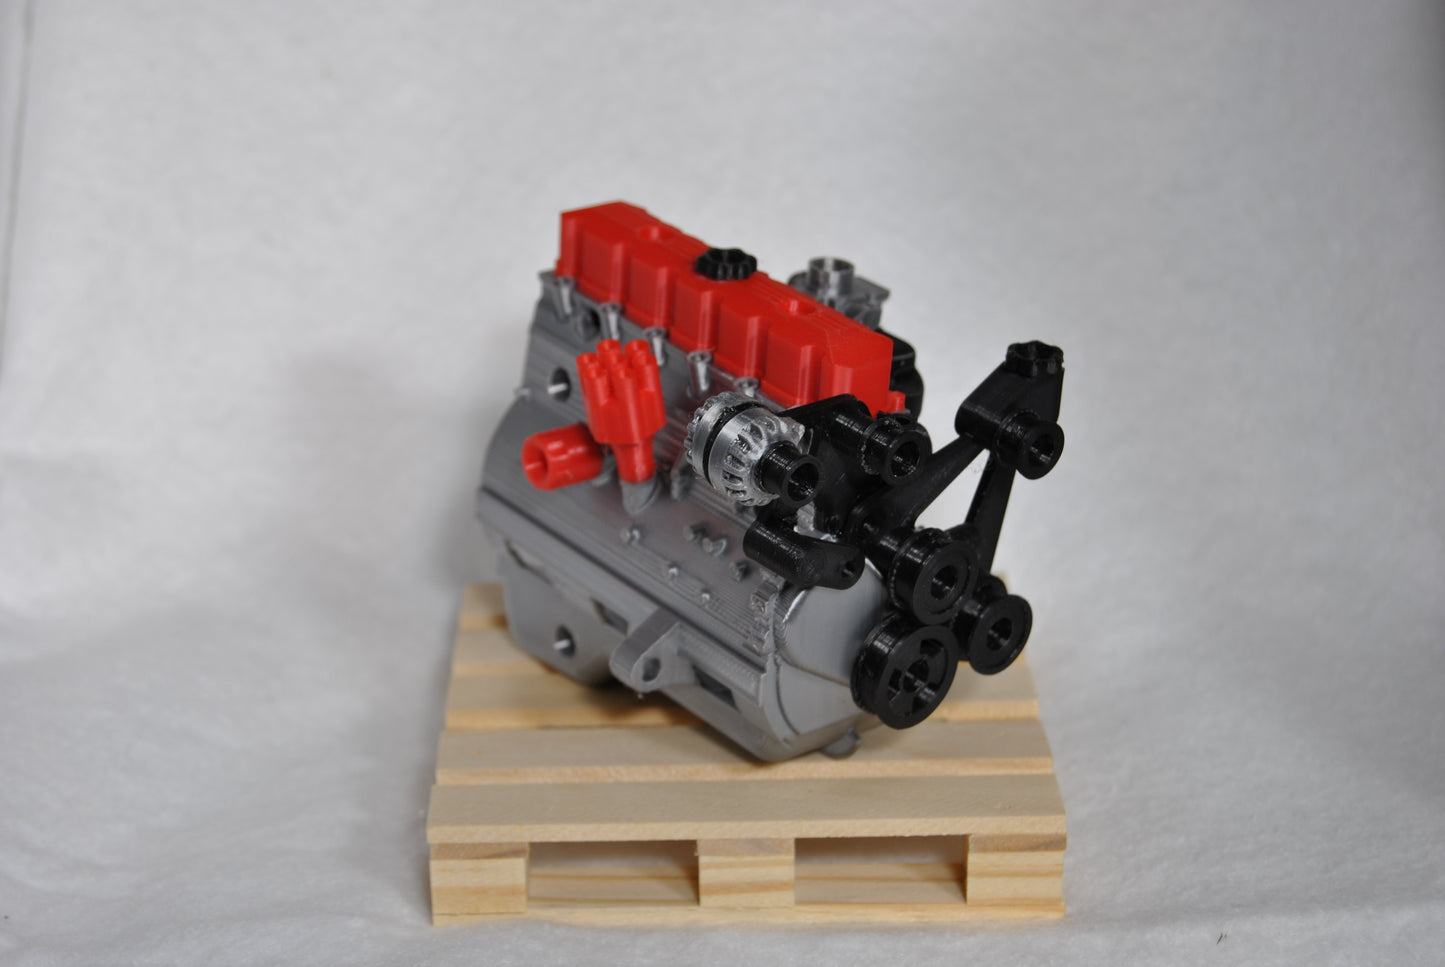 4.0L Motor Cover 1/10 Scale Engine